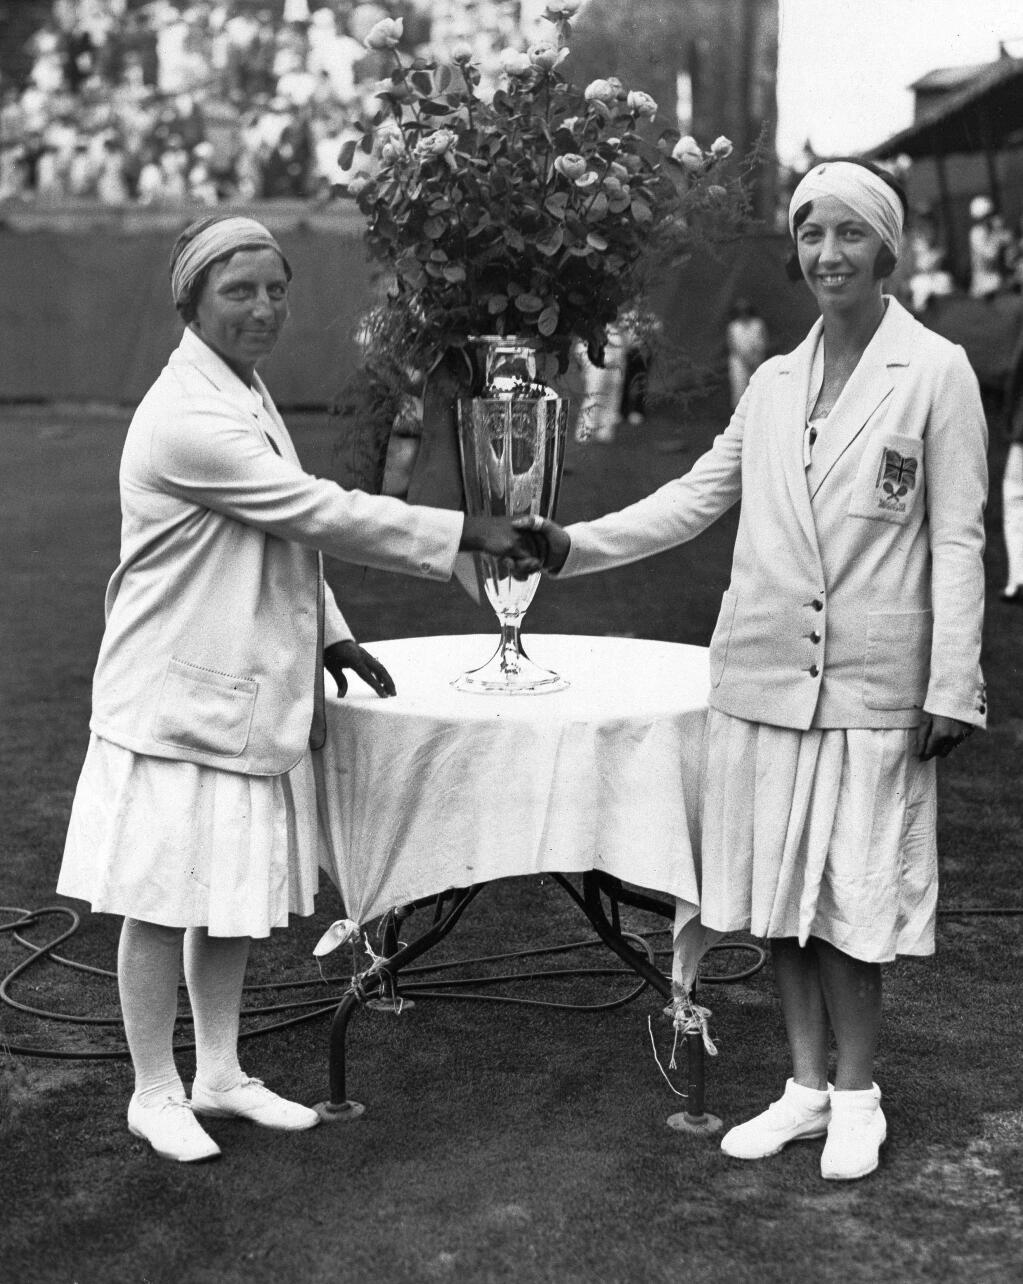 Tennis great Hazel Hotchkiss Wightman (left), was born in Healdsburg in 1886. She dominated American women's tennis before World War I, and won 45 U.S. titles during her life. In this photo, American team captain Hotchkiss Wightman receives the congratulations of Dorothy Shepperd-Barron, captain of an opposing team on Aug. 8, 1931. (AP Photo)